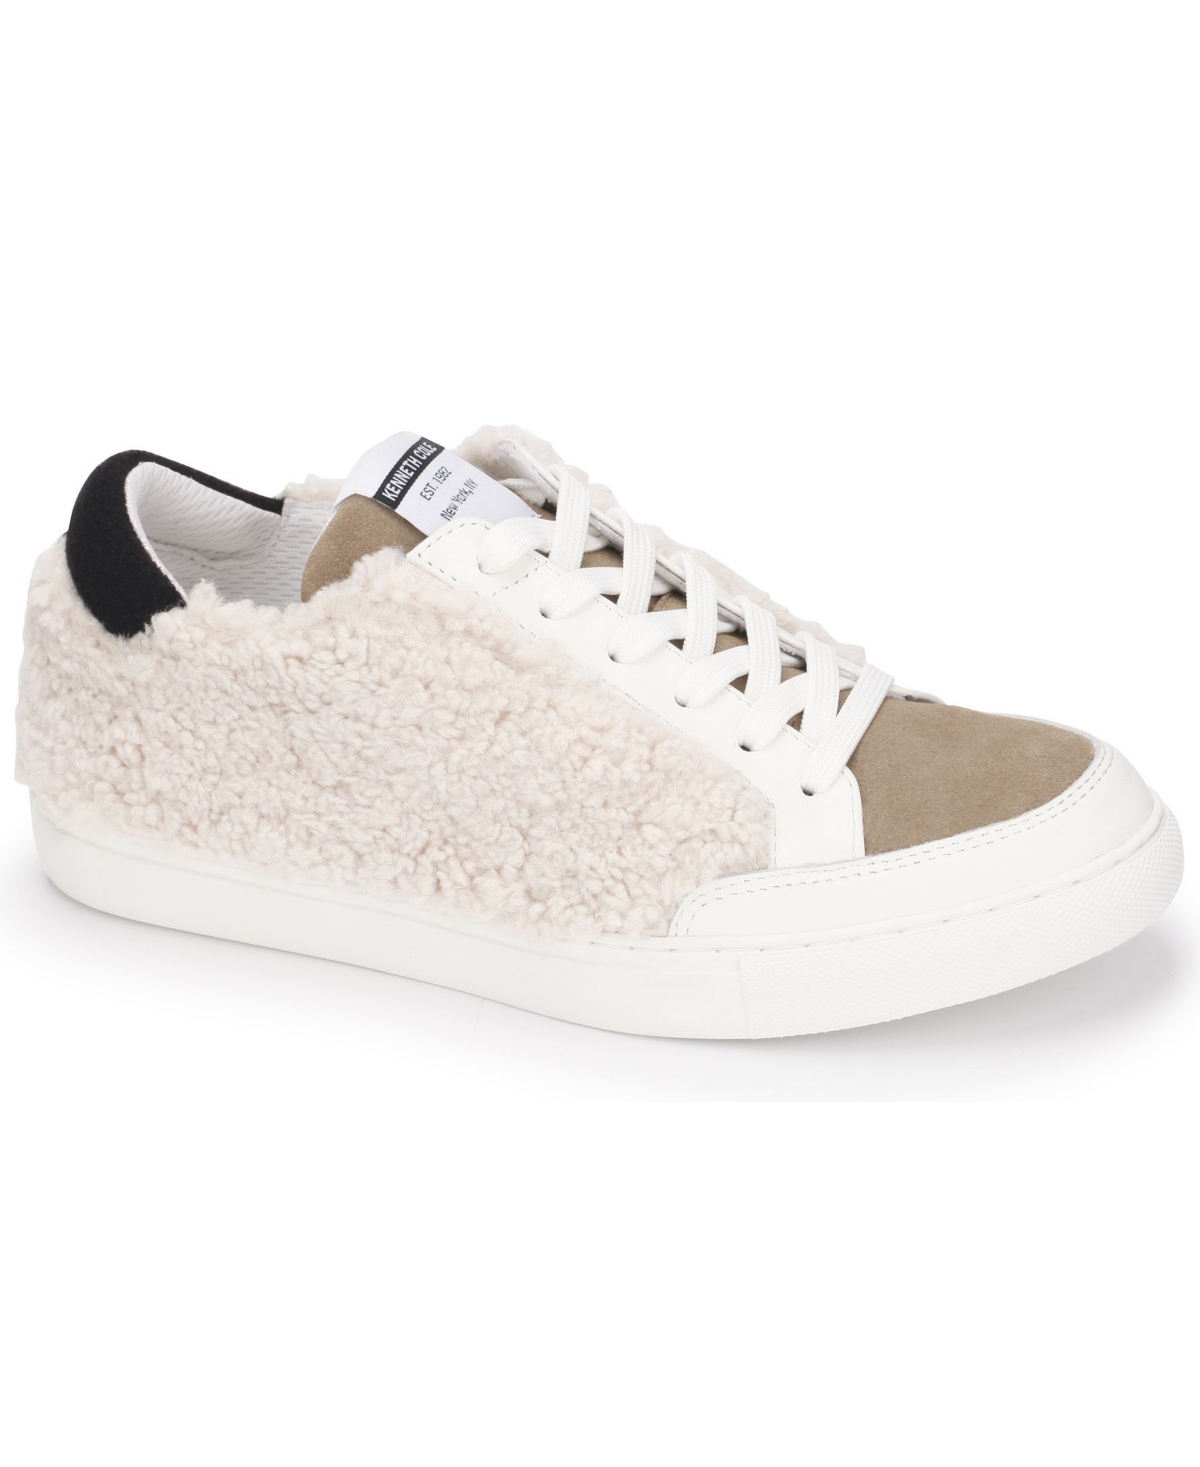 Women's Kam Guard Cozy Eo Lace-Up Sneakers - Natural/Taupe